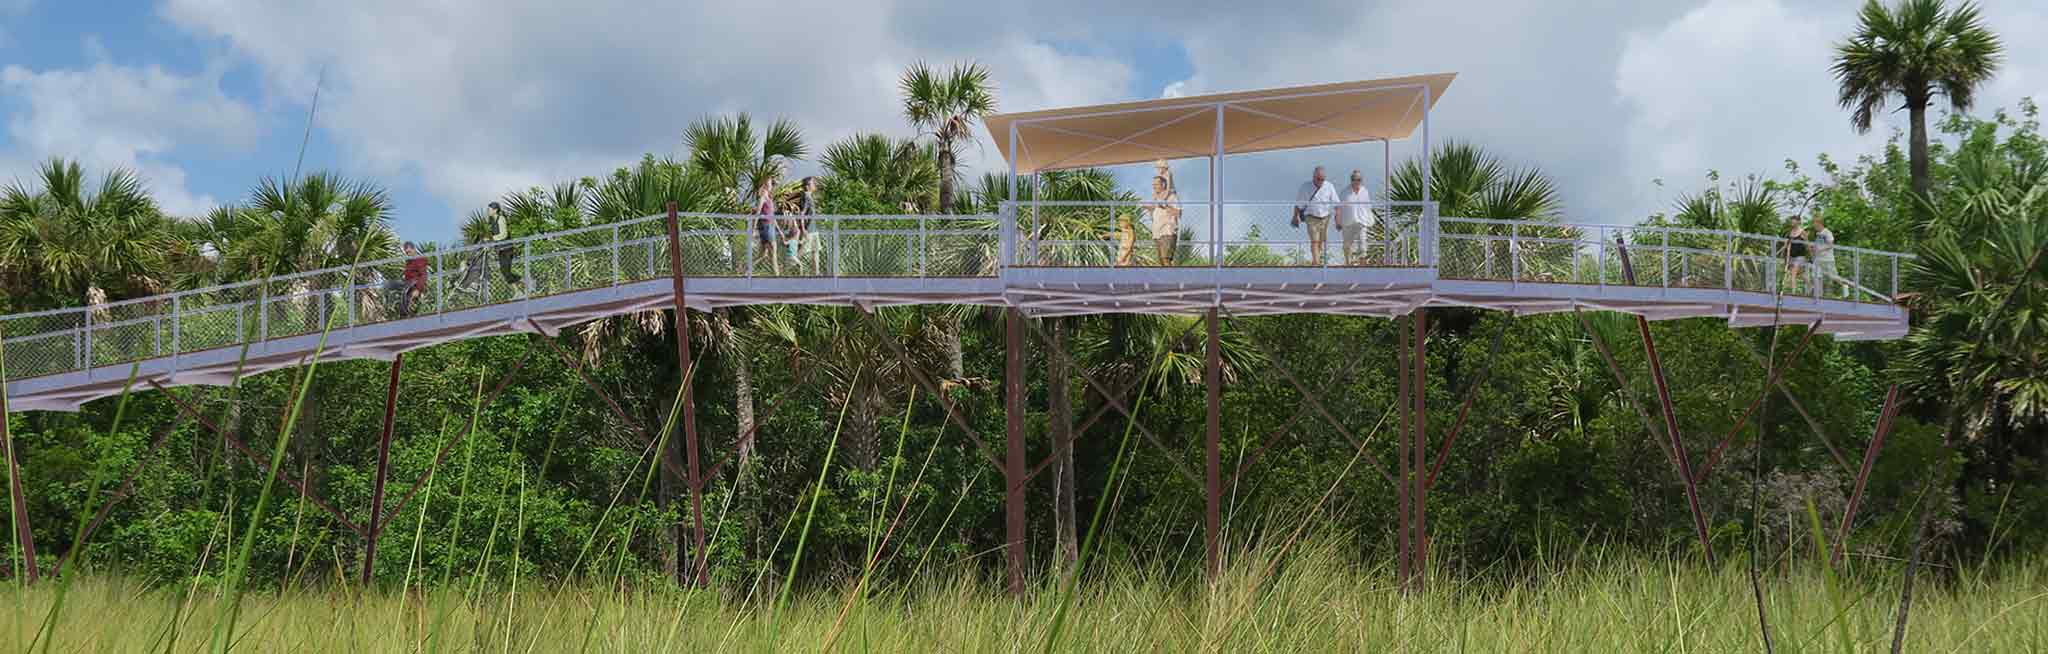 This rendering by Corban Architecture shows how an observation platform on a canopy walk could increase access for all.